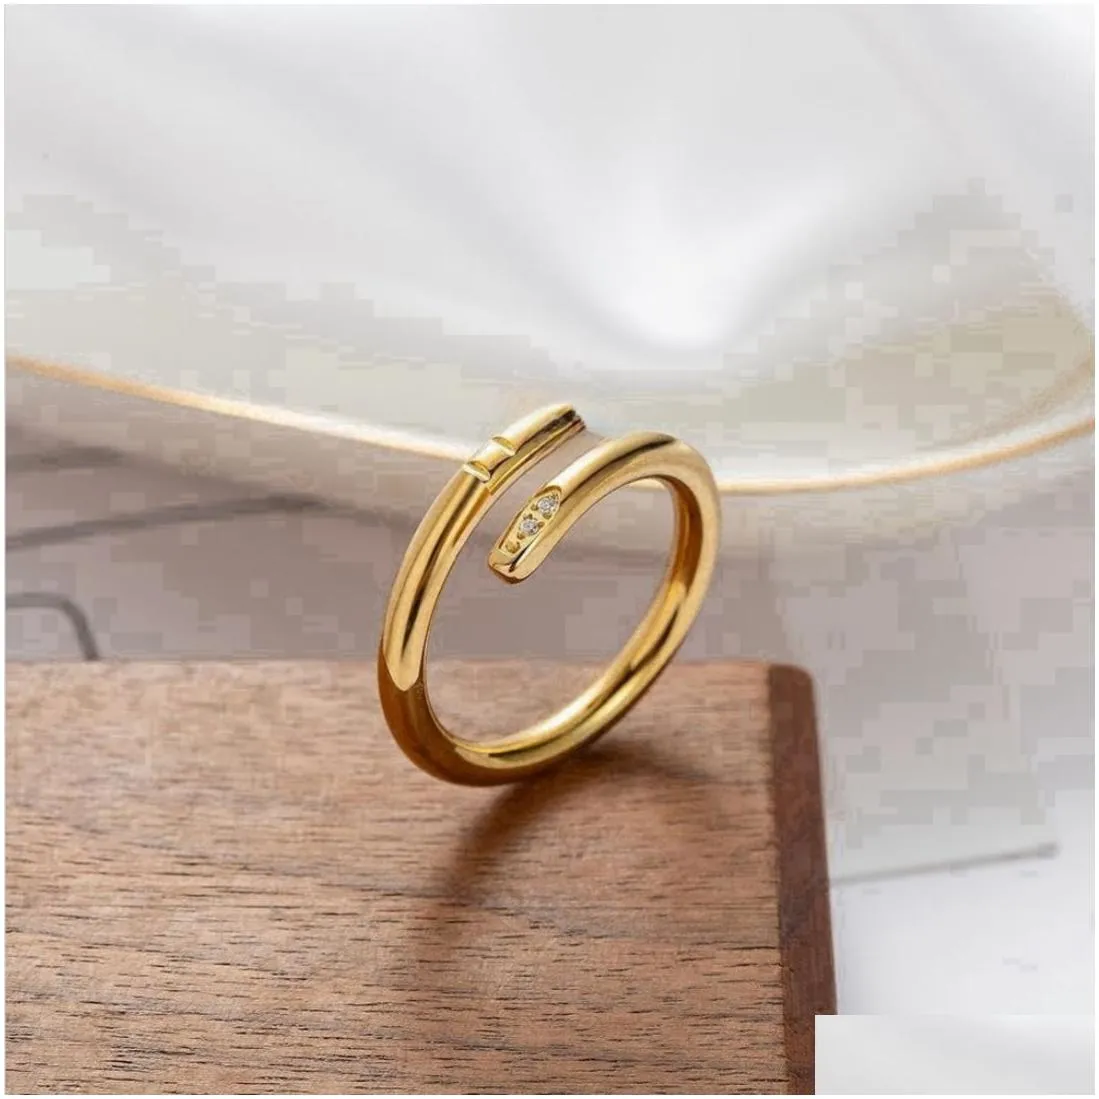 Luxury Classic Nail Ring Designer Ring Fashion Unisex Cuff Ring Couple Bangle Gold Ring Jewelry Valentine`s Day Gift